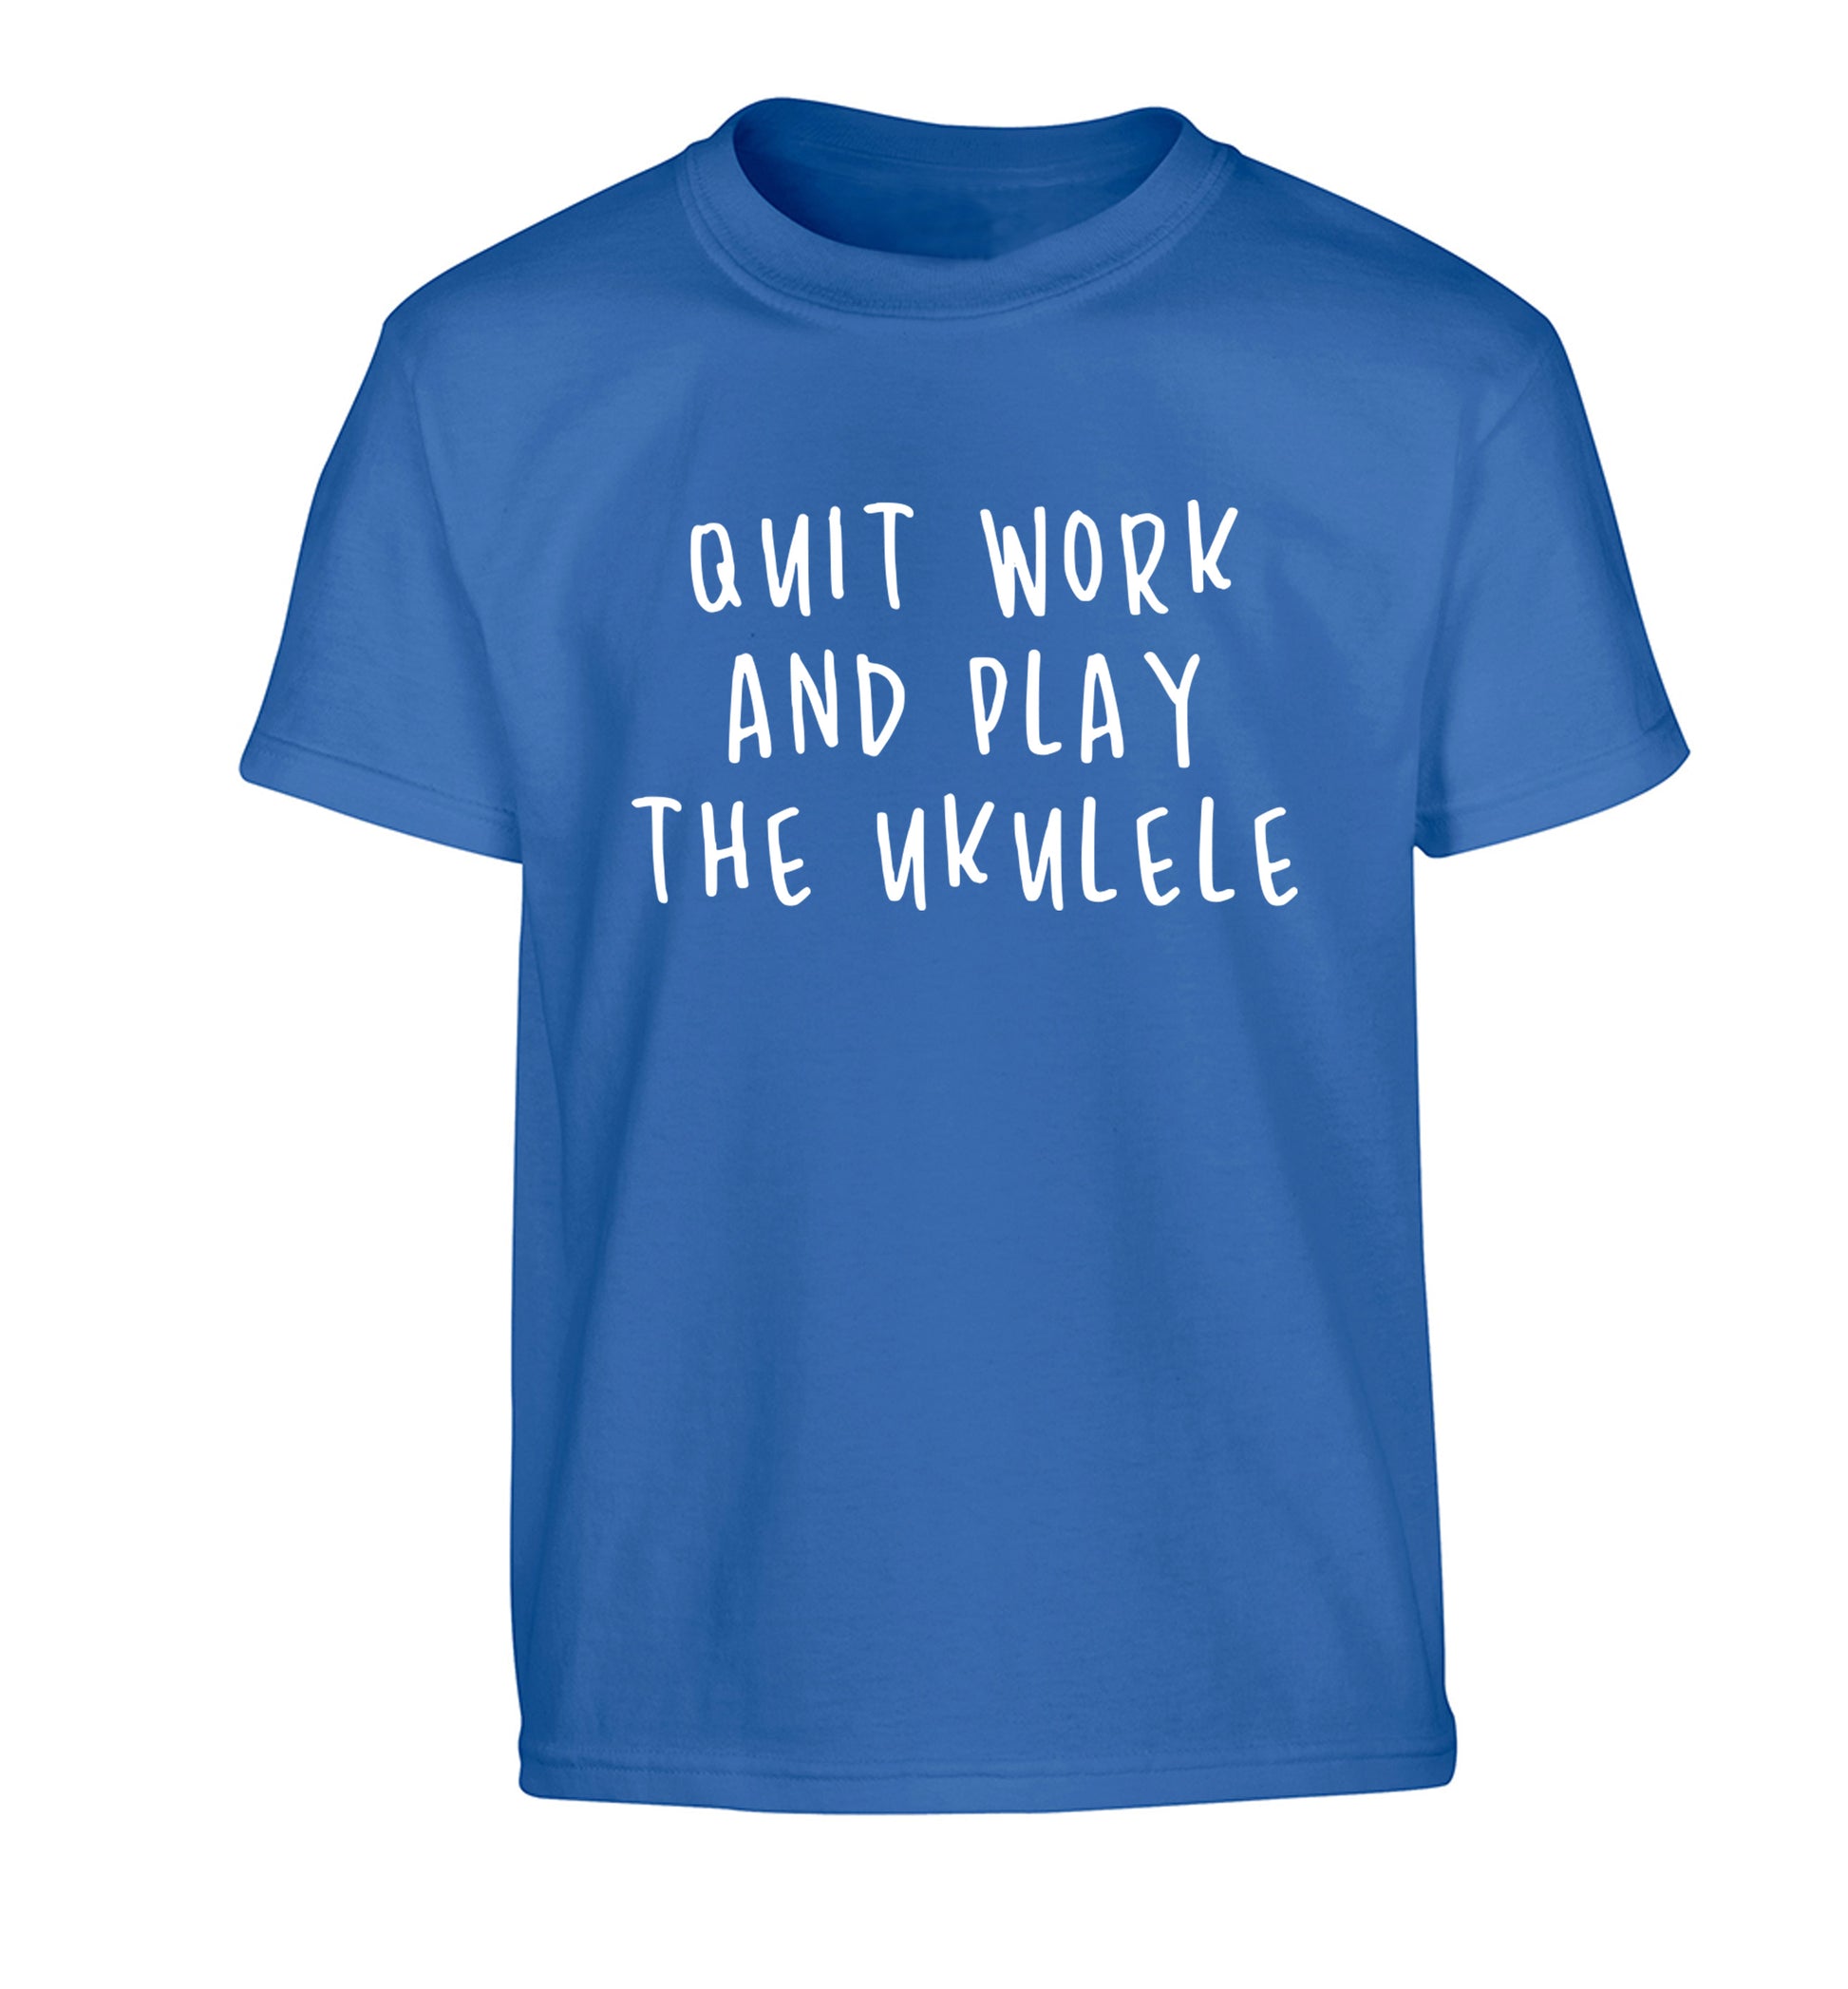 Quit work and play the ukulele Children's blue Tshirt 12-14 Years